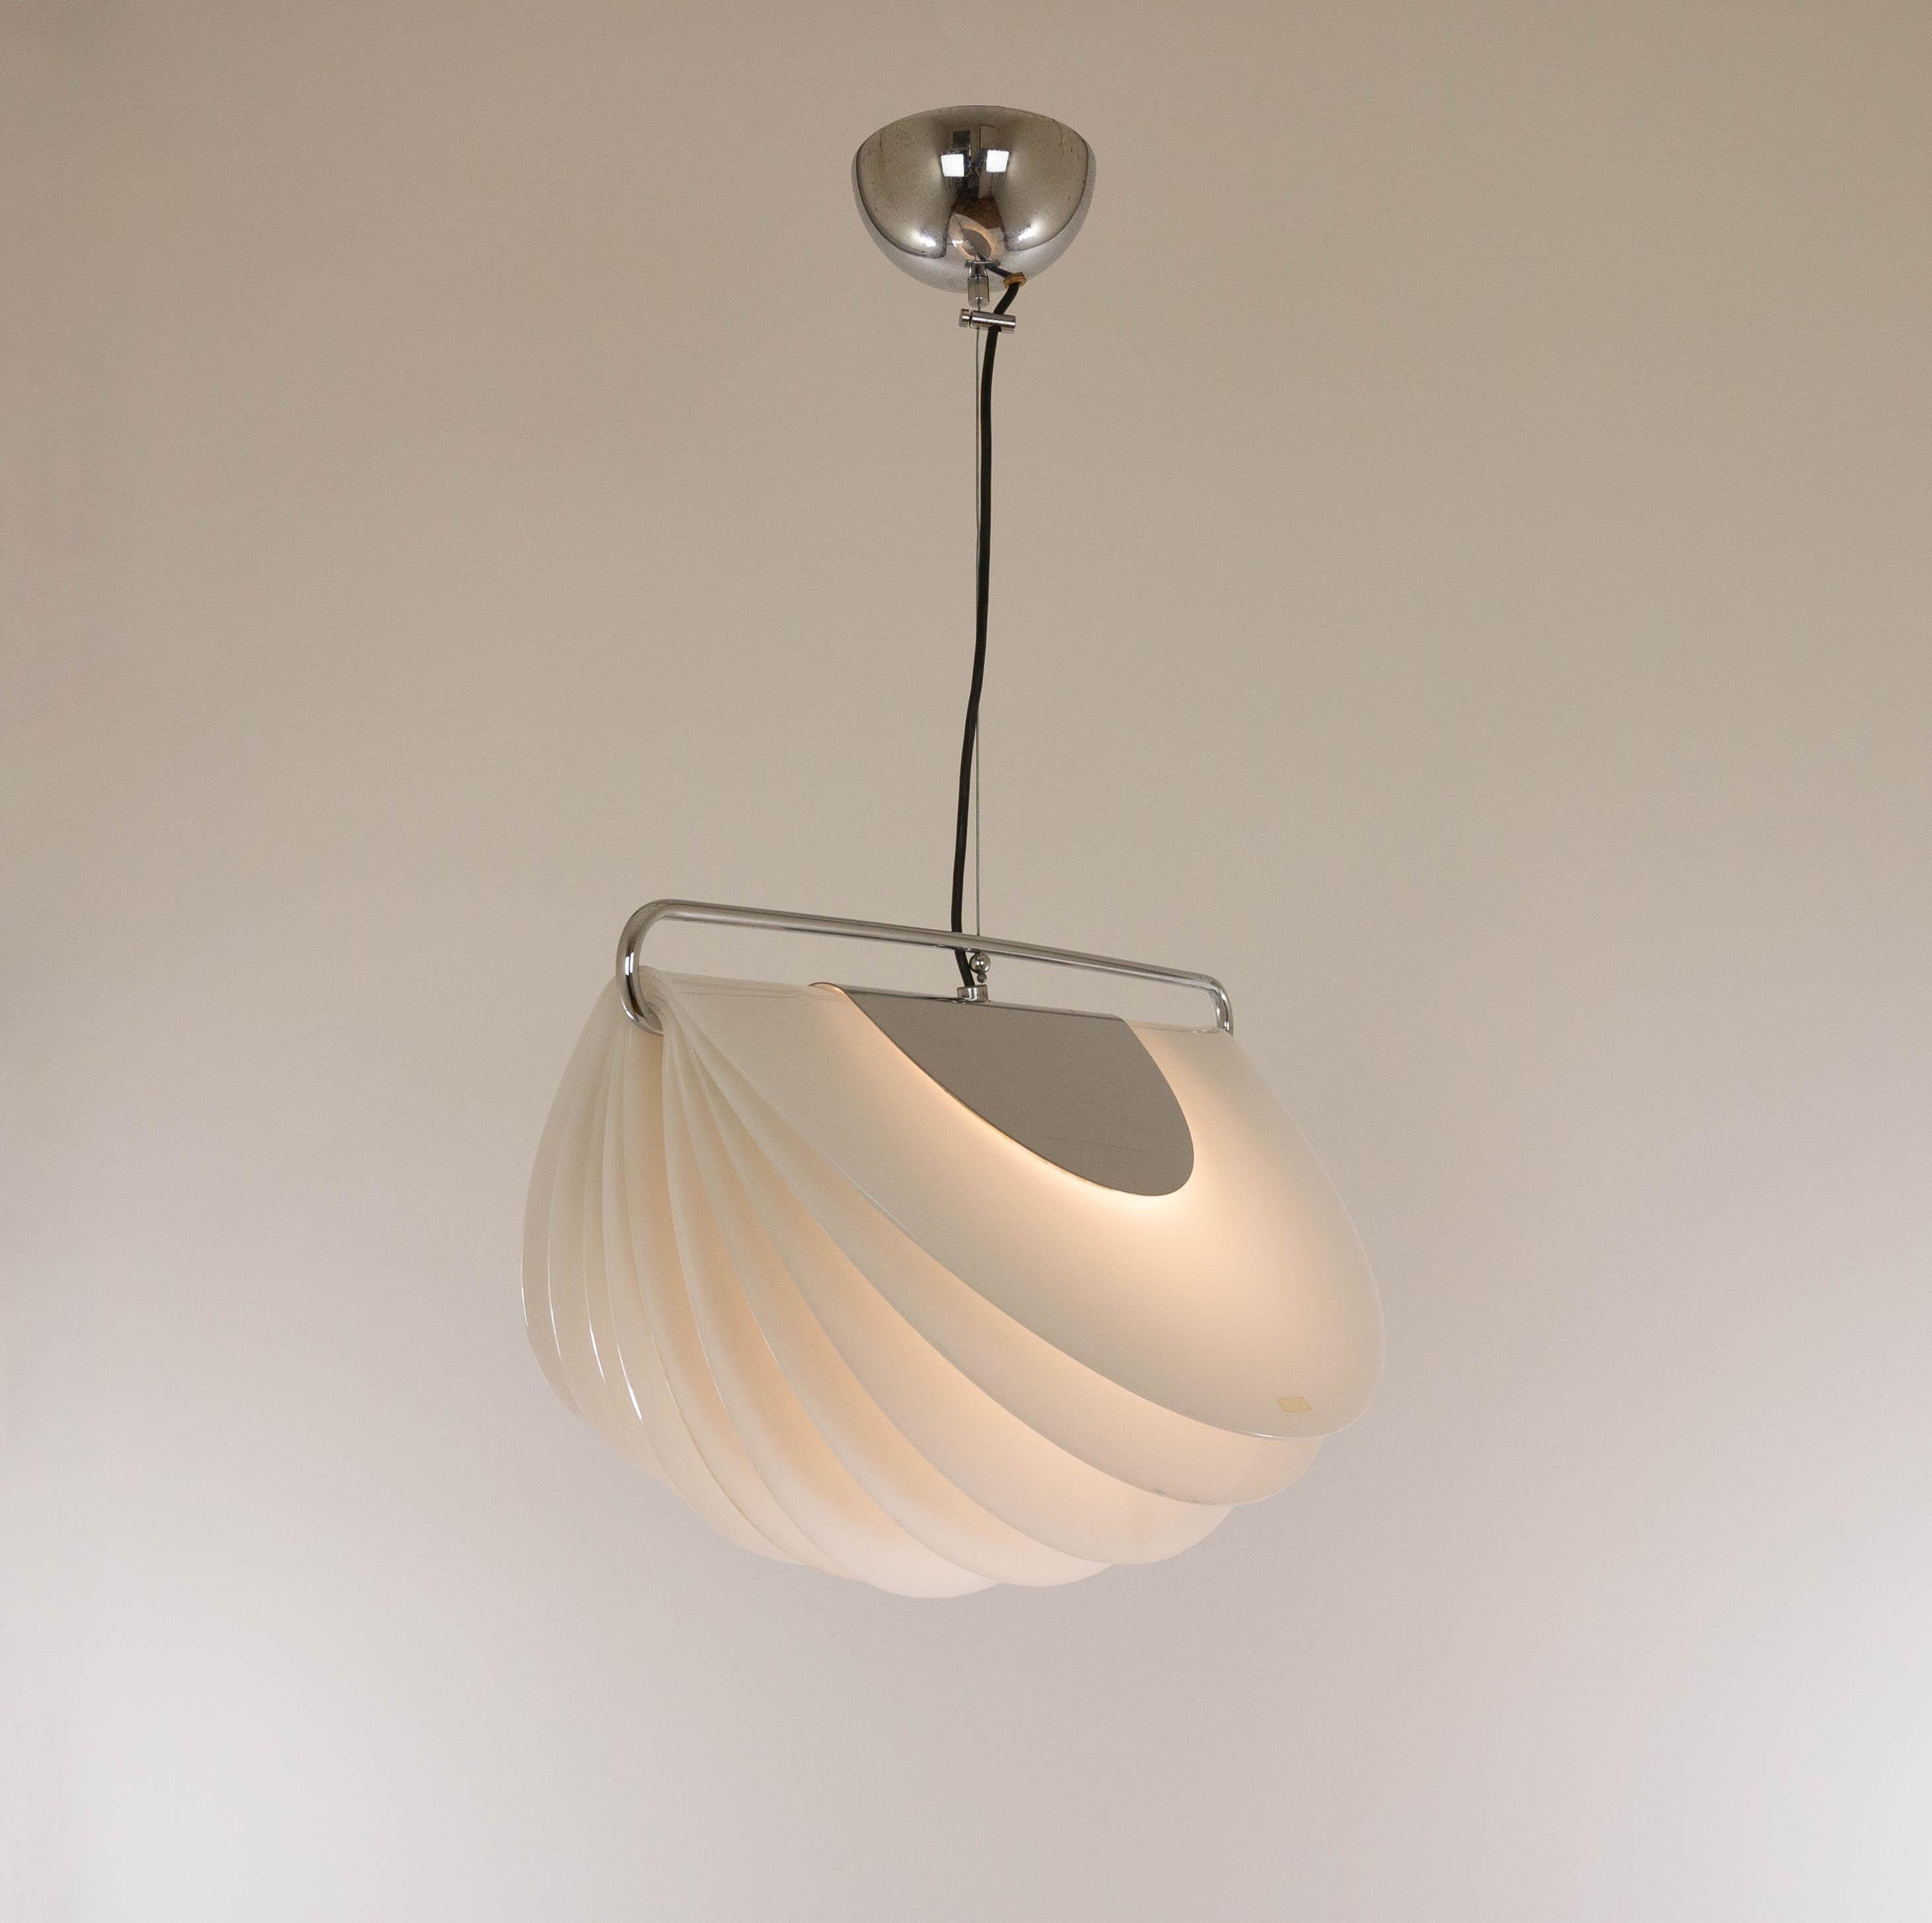 Spicchio pendant designed by Ermanno Lampa & Sergio Brazzoli in 1972 and produced by Harvey Guzzini.

The model consists of a chromed metal bracket on which 4 different curved sheets of white methacrylate are placed.

Ermanno Lampa and Sergio